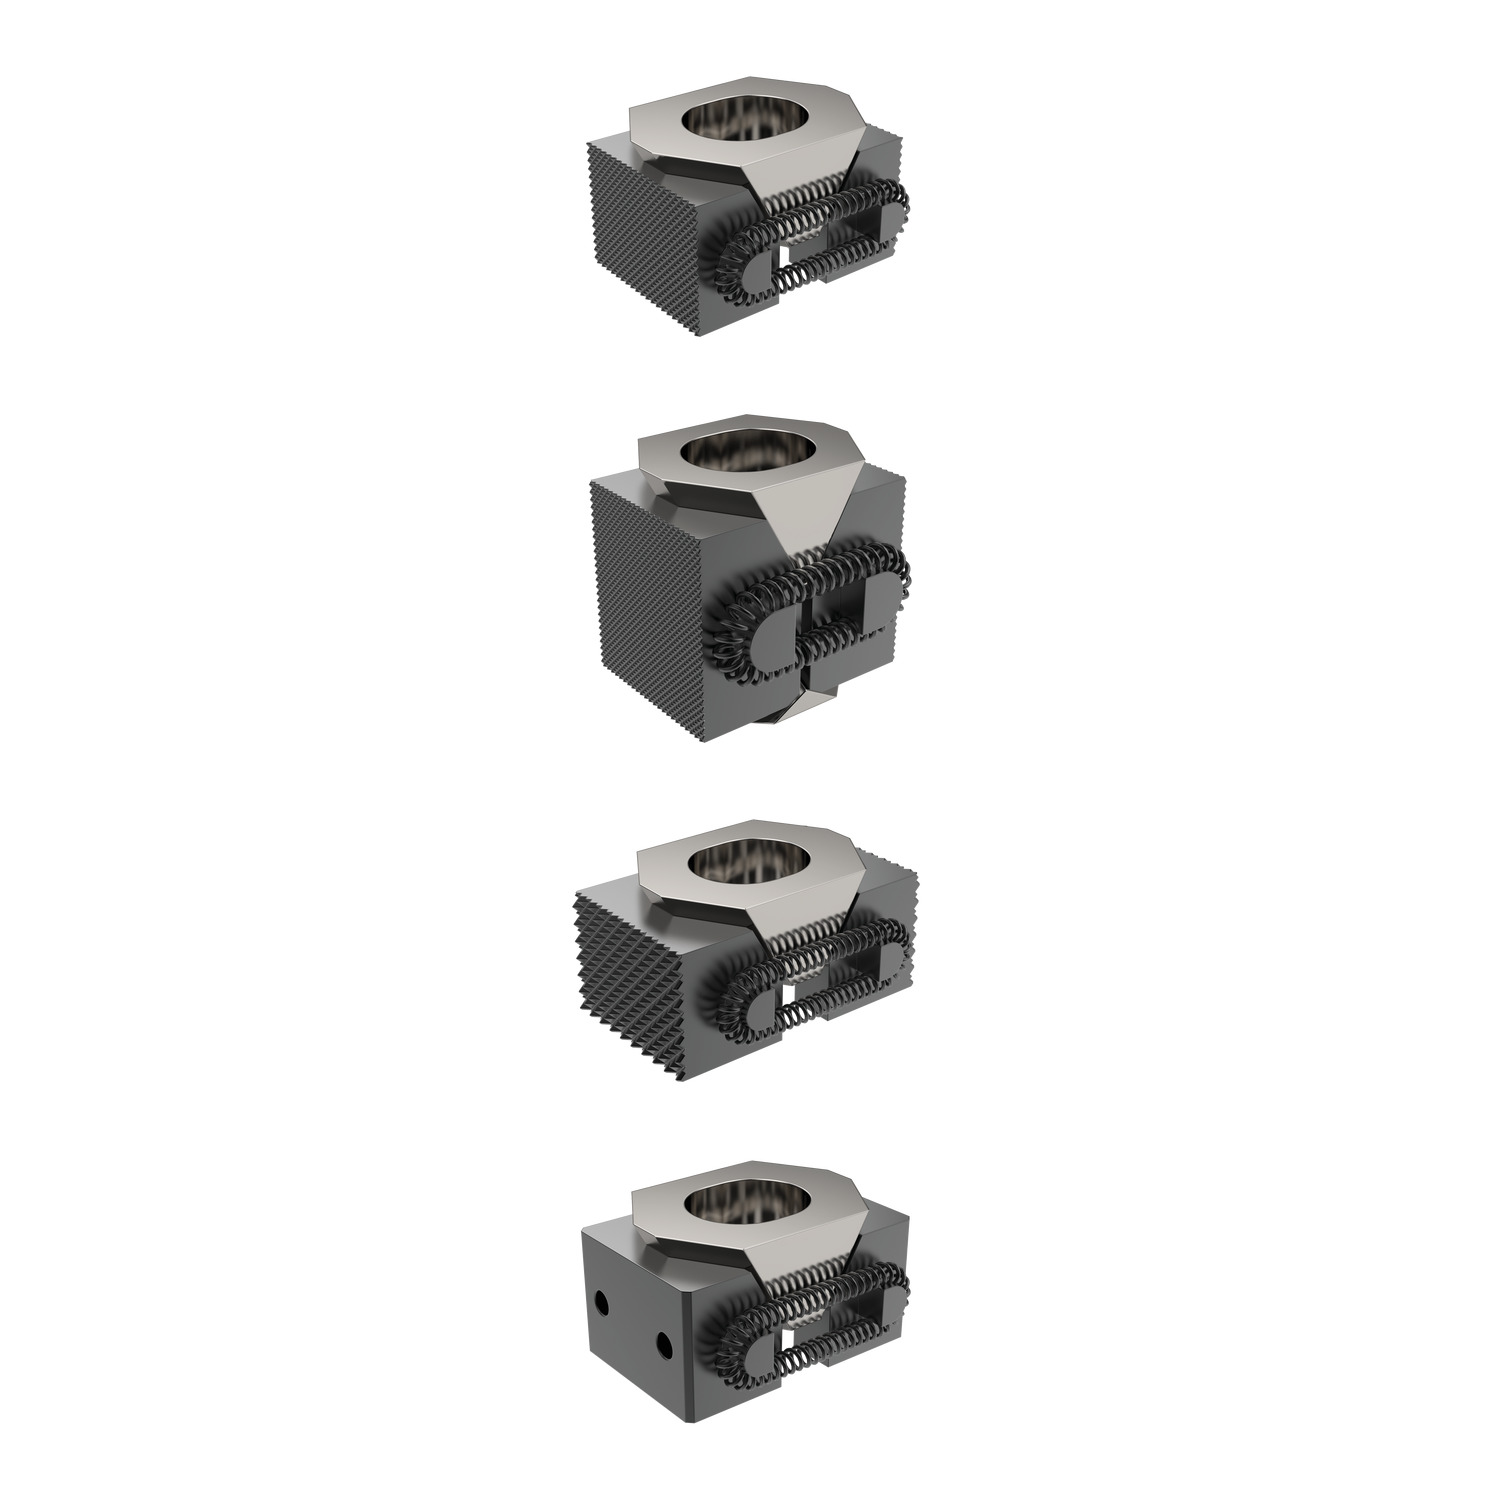 Product 12430, Taper Clamps with downhold action / 